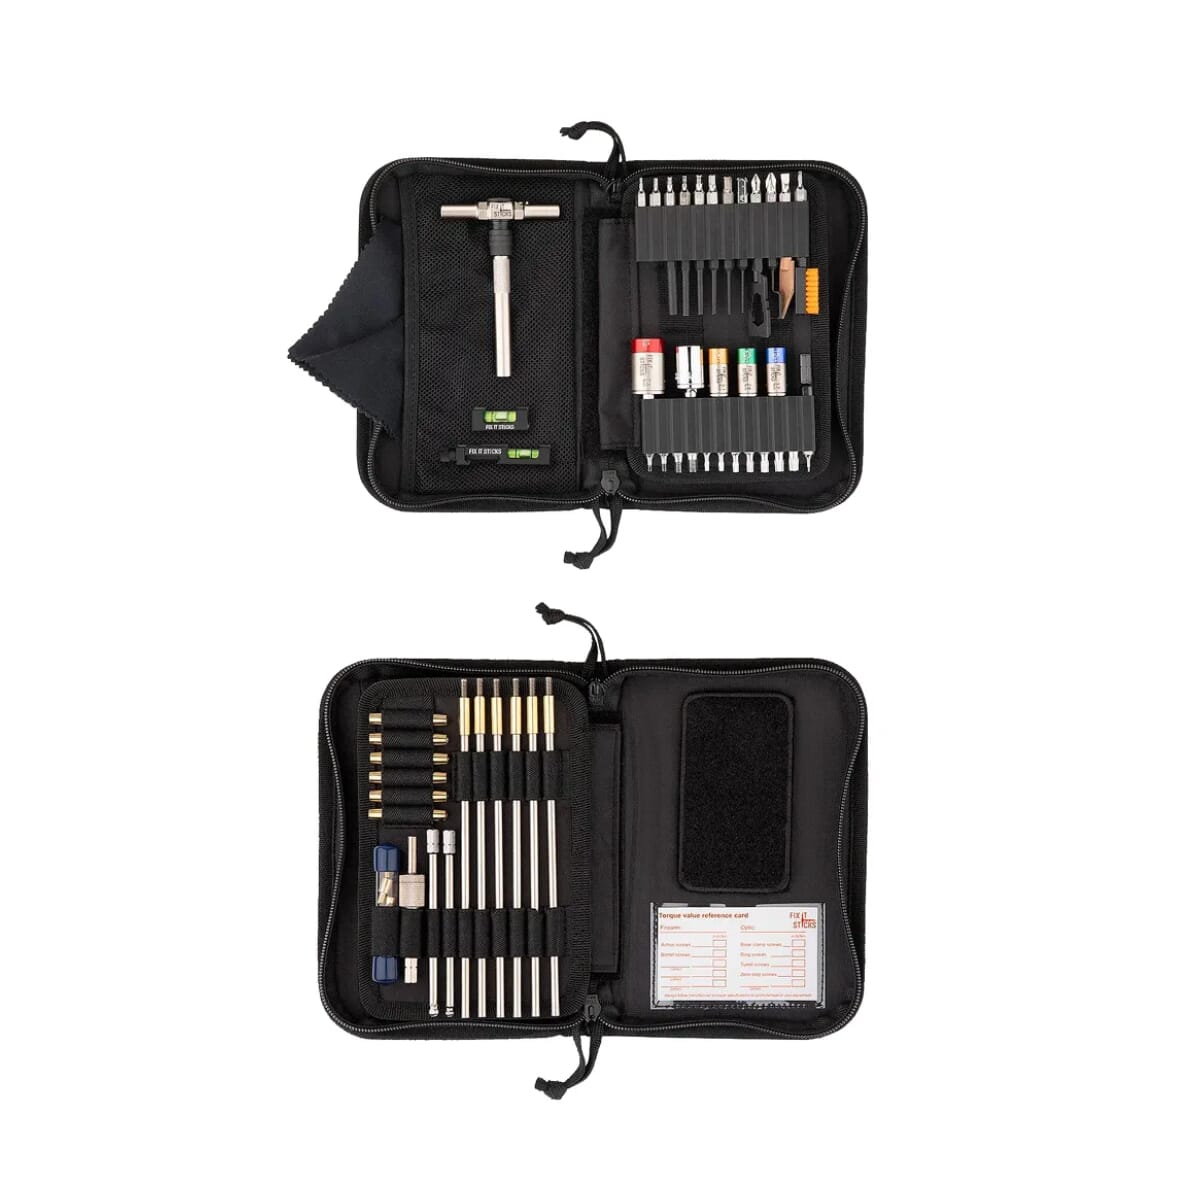 Fix It Sticks - 65, 45, 25 & 15 Inch lbs Kit with Deluxe Case, T-Handle,  and Extended Bit